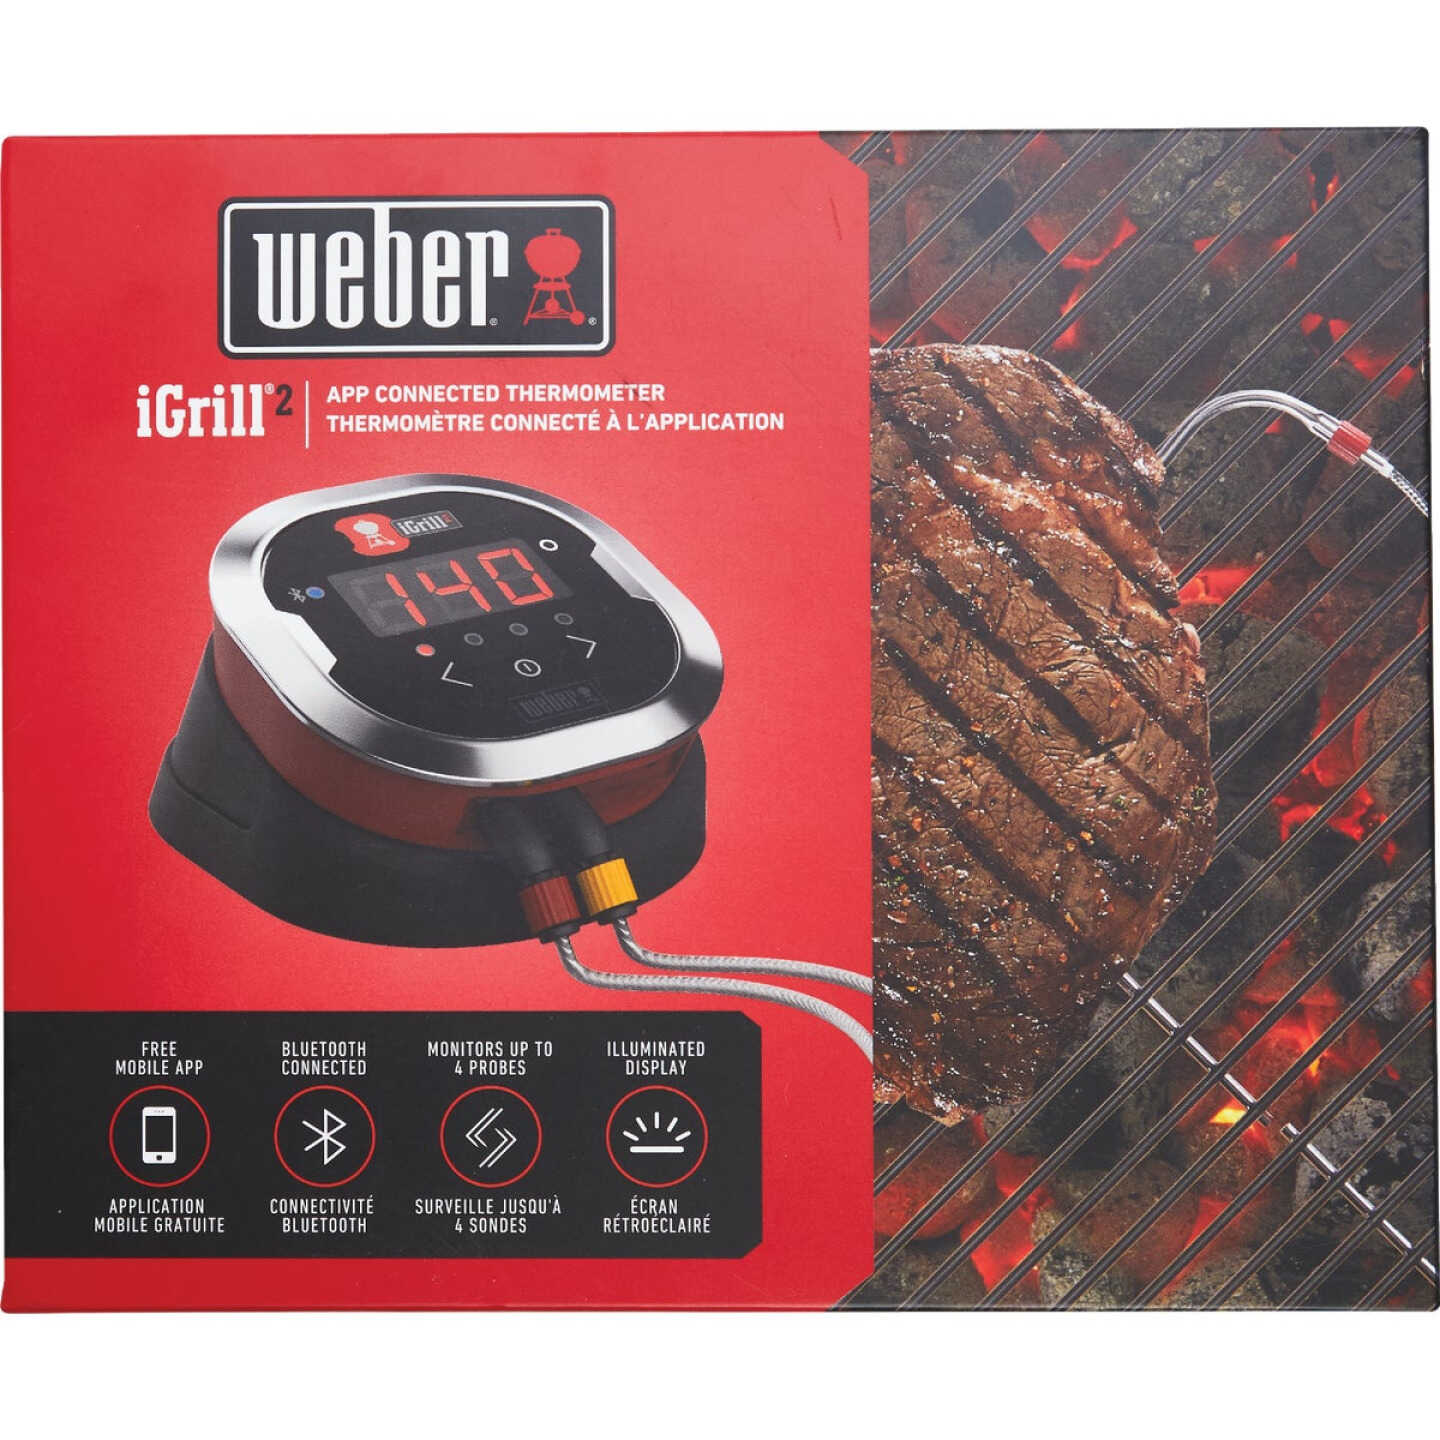 Weber iGrill2 Wireless Thermometer